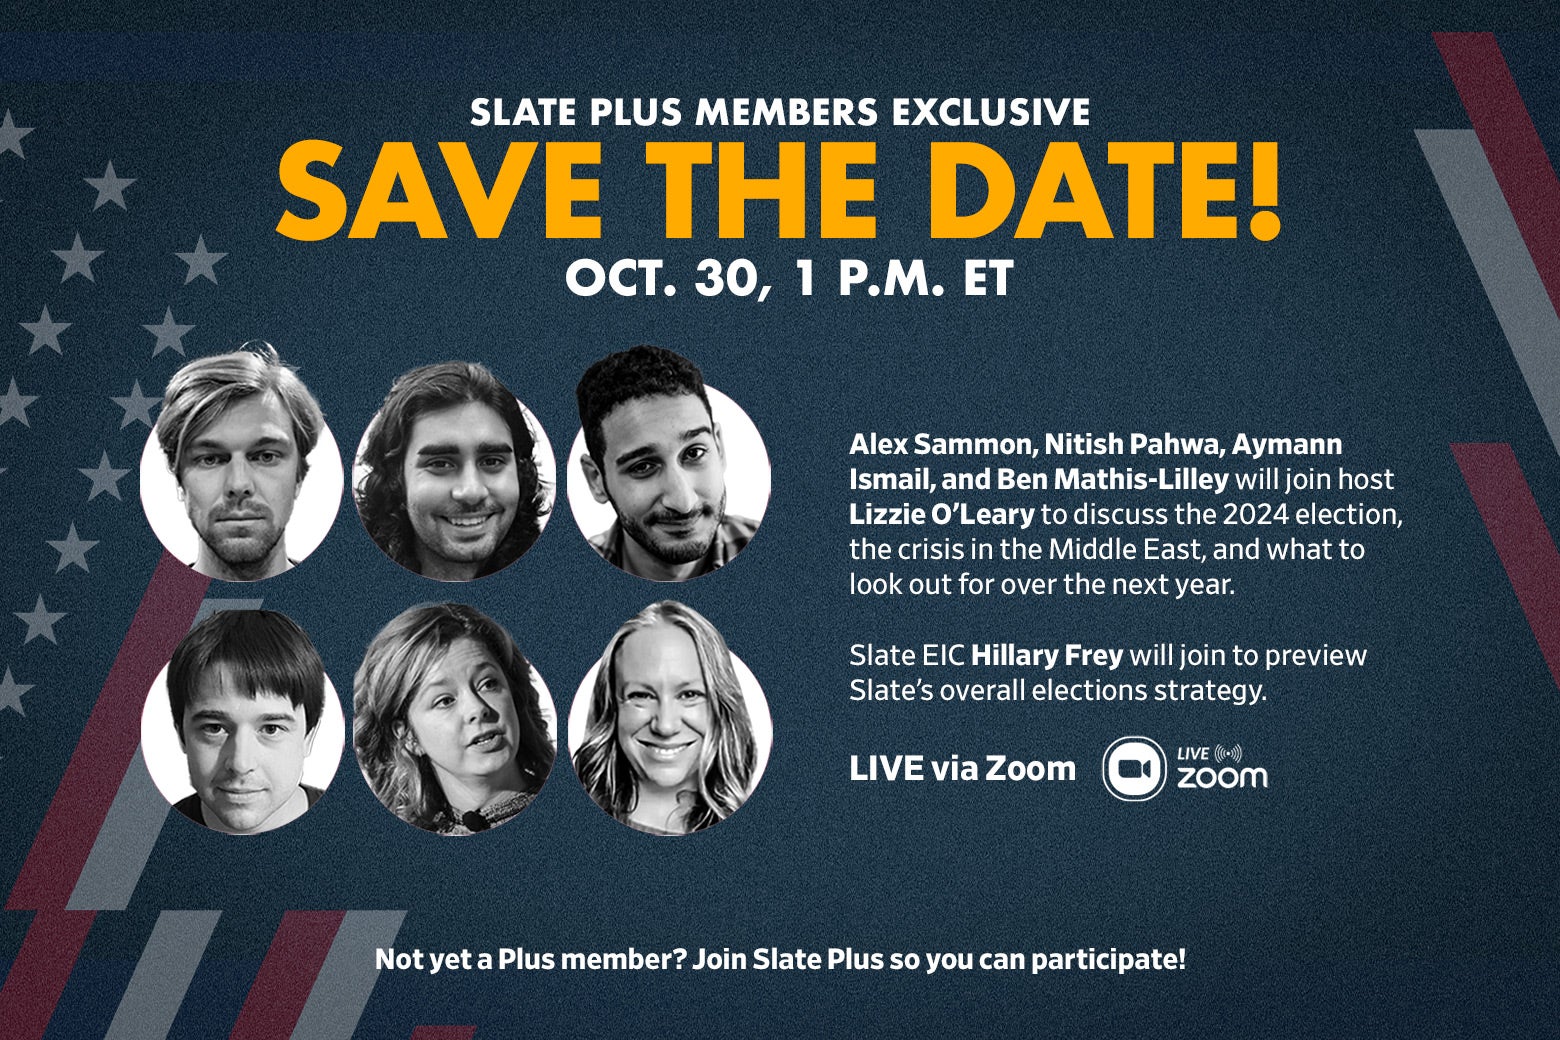 A graphic that reads: SLATE PLUS MEMBERS EXCLUSIVE: SAVE THE DATE! Oct. 30, 1 p.m. ET. Alex Sammon, Nitish Pahwa, Aymann Ismail, and Ben Mathis-Lilley will join host Lizzie O'Leary to discuss the 2024 election, the crisis in the Middle East, and what to look out for over the next year. Slate EIC Hillary Frey will join to preview Slate's overall elections strategy. LIVE via Zoom. Not yet a plus member? Join Slate Plus so you can participate!